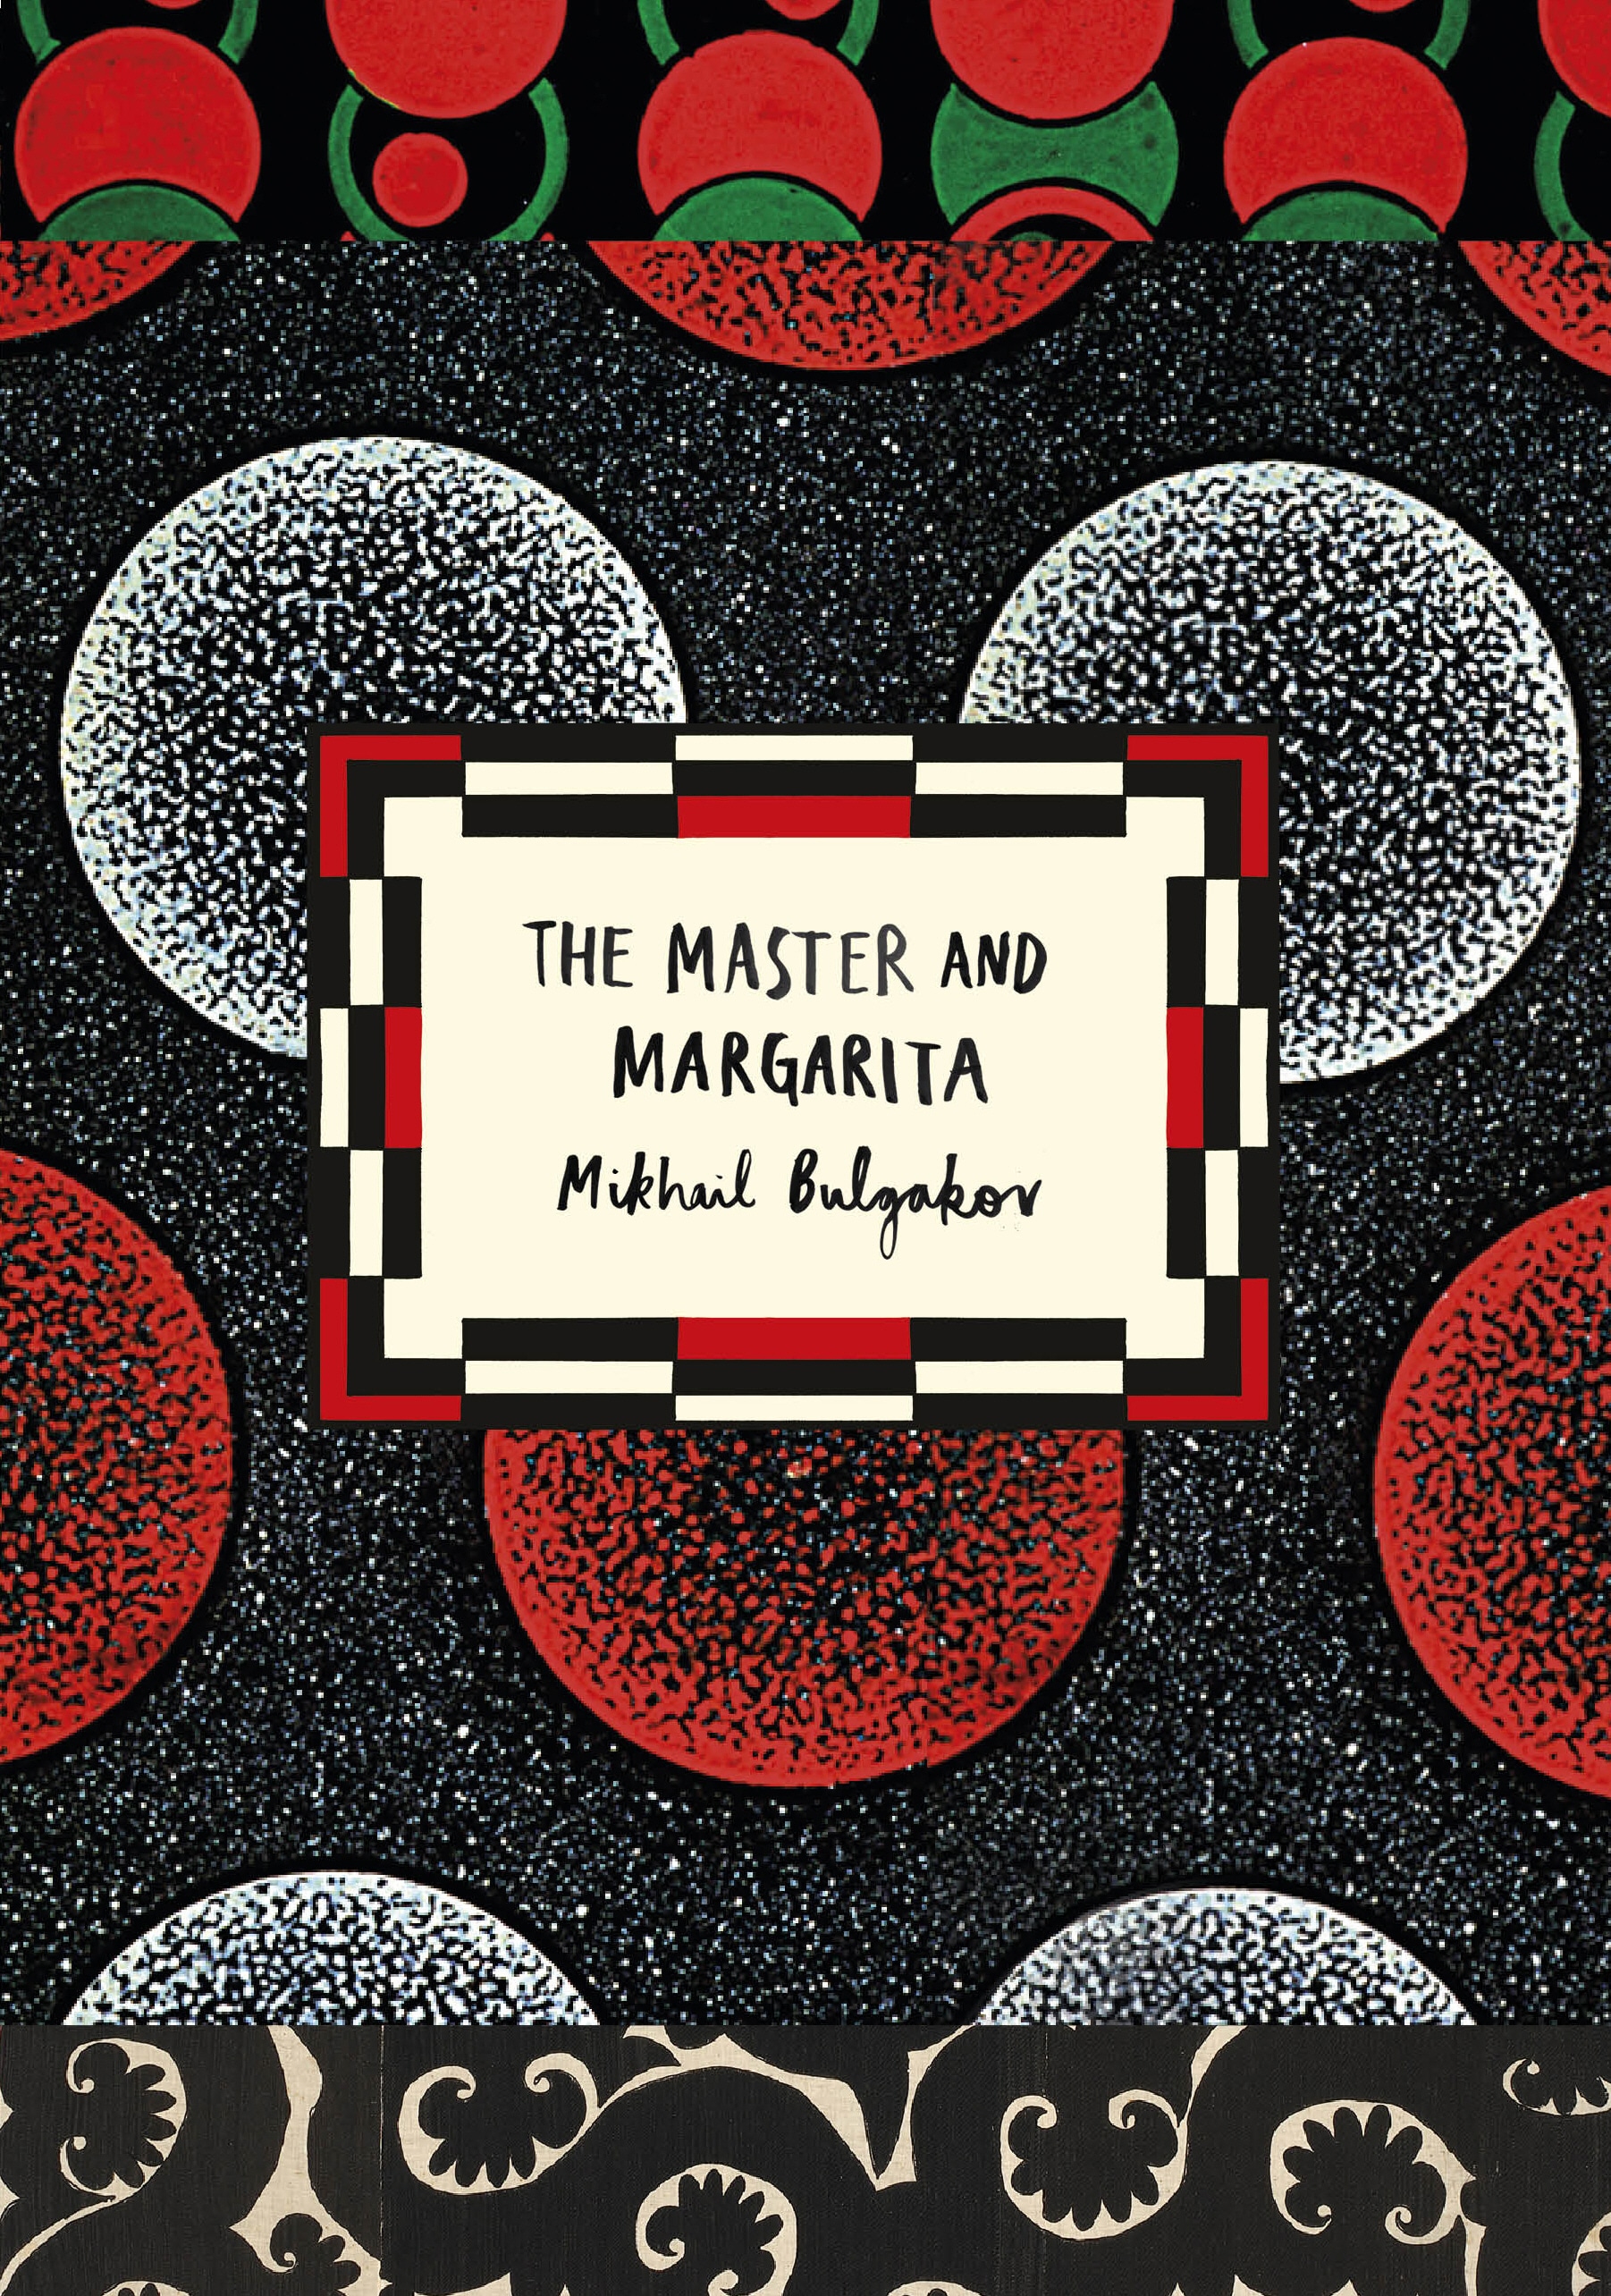 Book “The Master and Margarita (Vintage Classic Russians Series)” by Mikhail Bulgakov — January 5, 2017